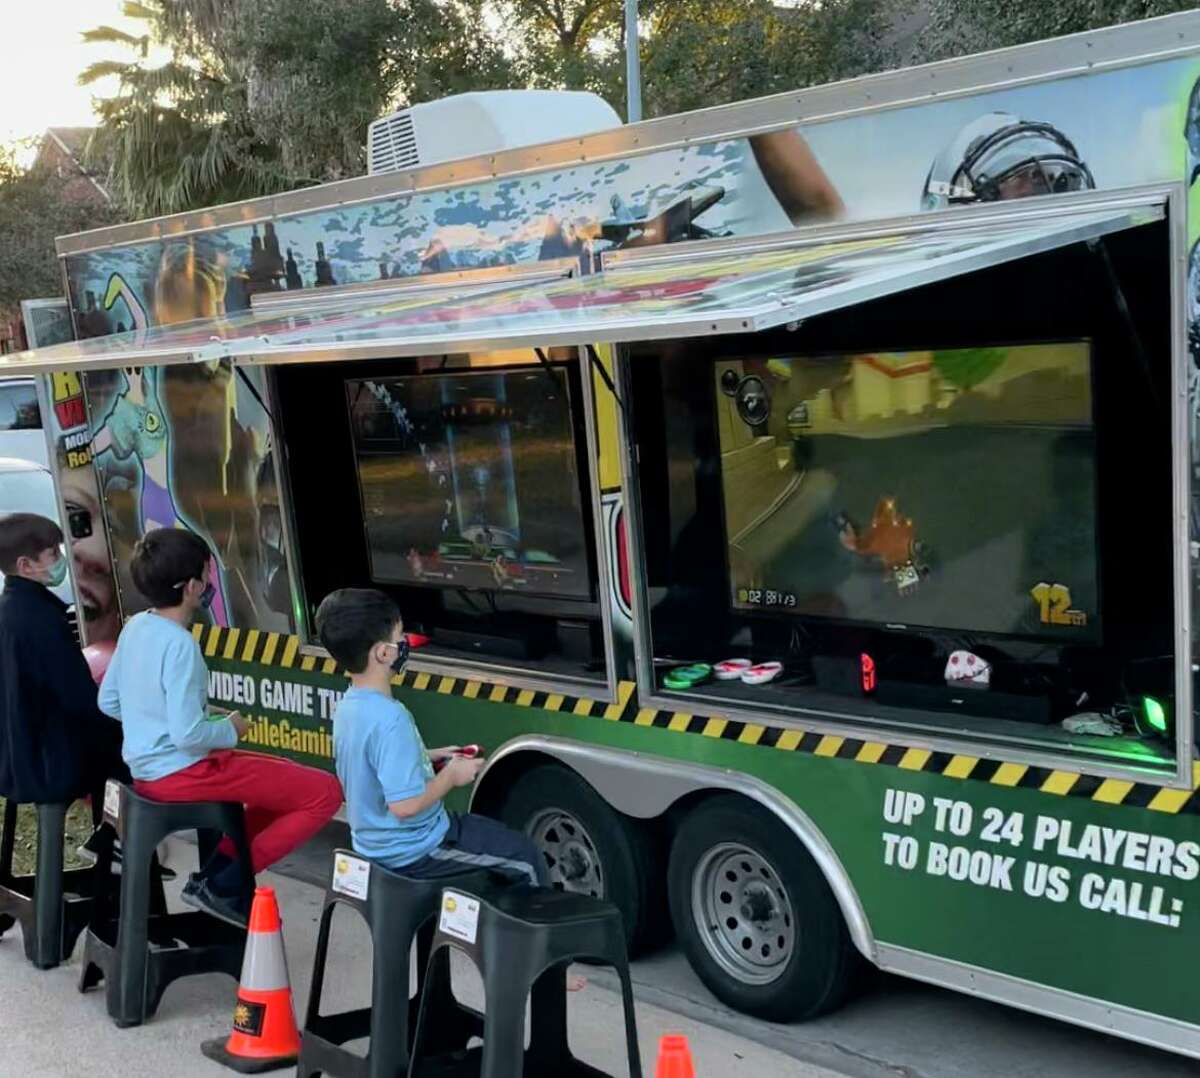 Children attending a birthday party play video games in Optimum Mobile Gaming’s video game truck on Jan. 22, 2021.